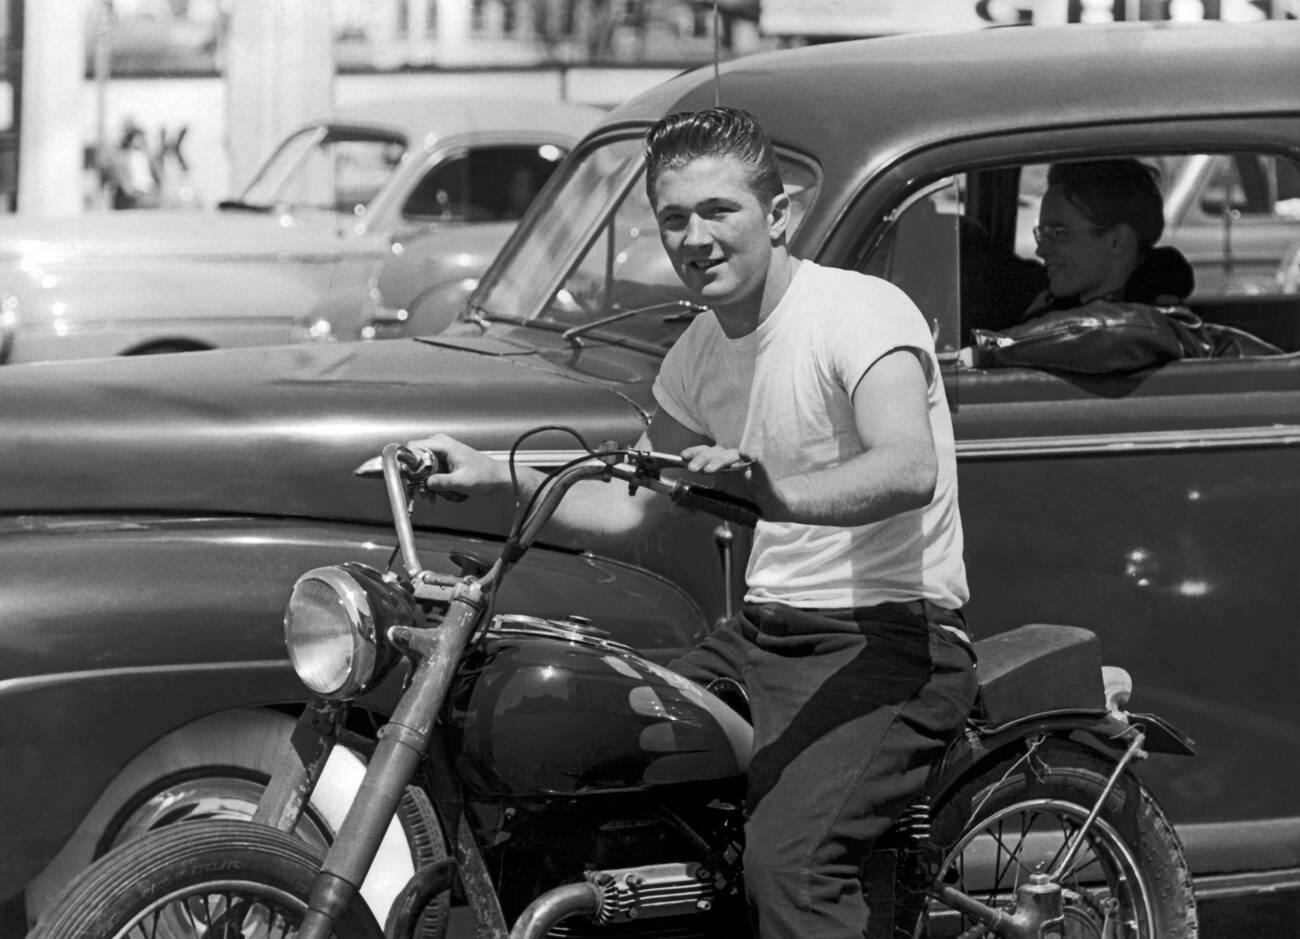 Young man on a motorcycle with a friend in a leather jacket in a car, San Francisco, California, circa 1955.